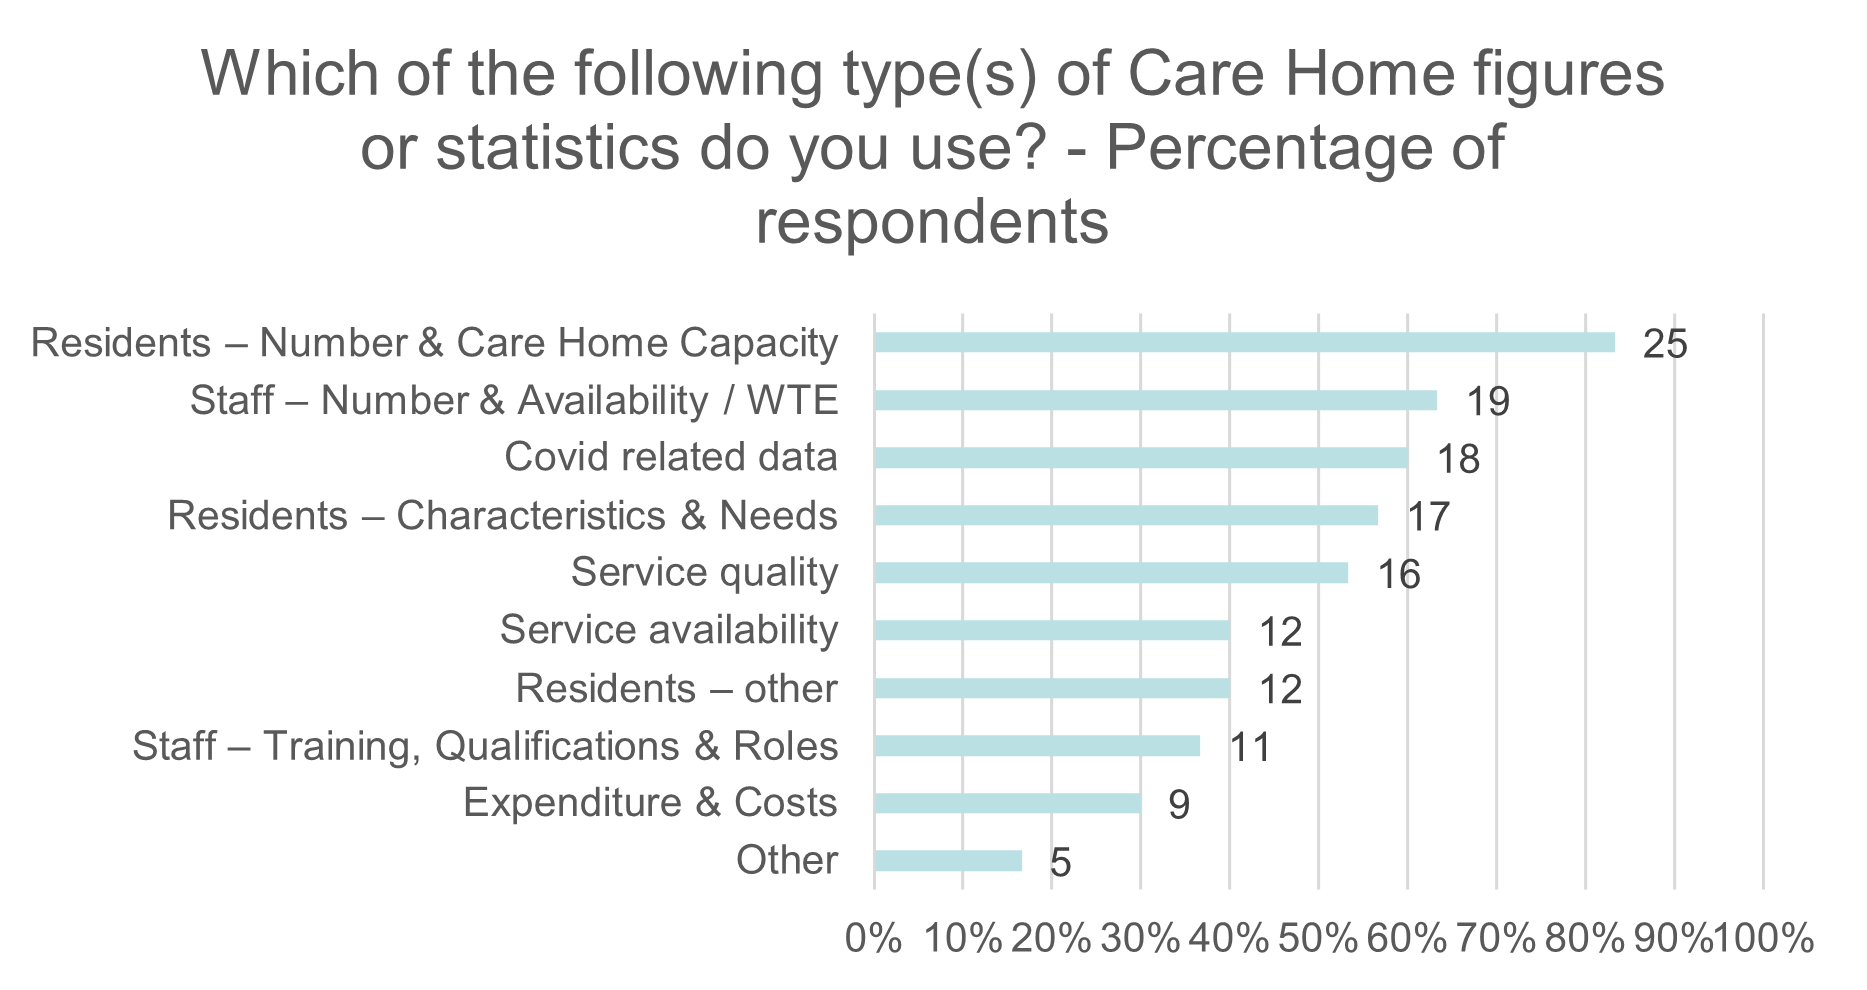 This chart shows the Care Home figures or statistics that data users used. It shows the percentage of respondents and the raw number of responses next to each row. The results are as follows: Residents – Number and Care Home Capacity 25 responses, Staff – Number and availability / WTE 19 responses, Covid related data 18 responses, Residents – Characteristics and Needs 17 responses, Service quality 16 responses, Service availability 12 responses, Residents – other 12 responses, Staff – Training, Qualifications and Roles 9 responses and Other 5 responses.